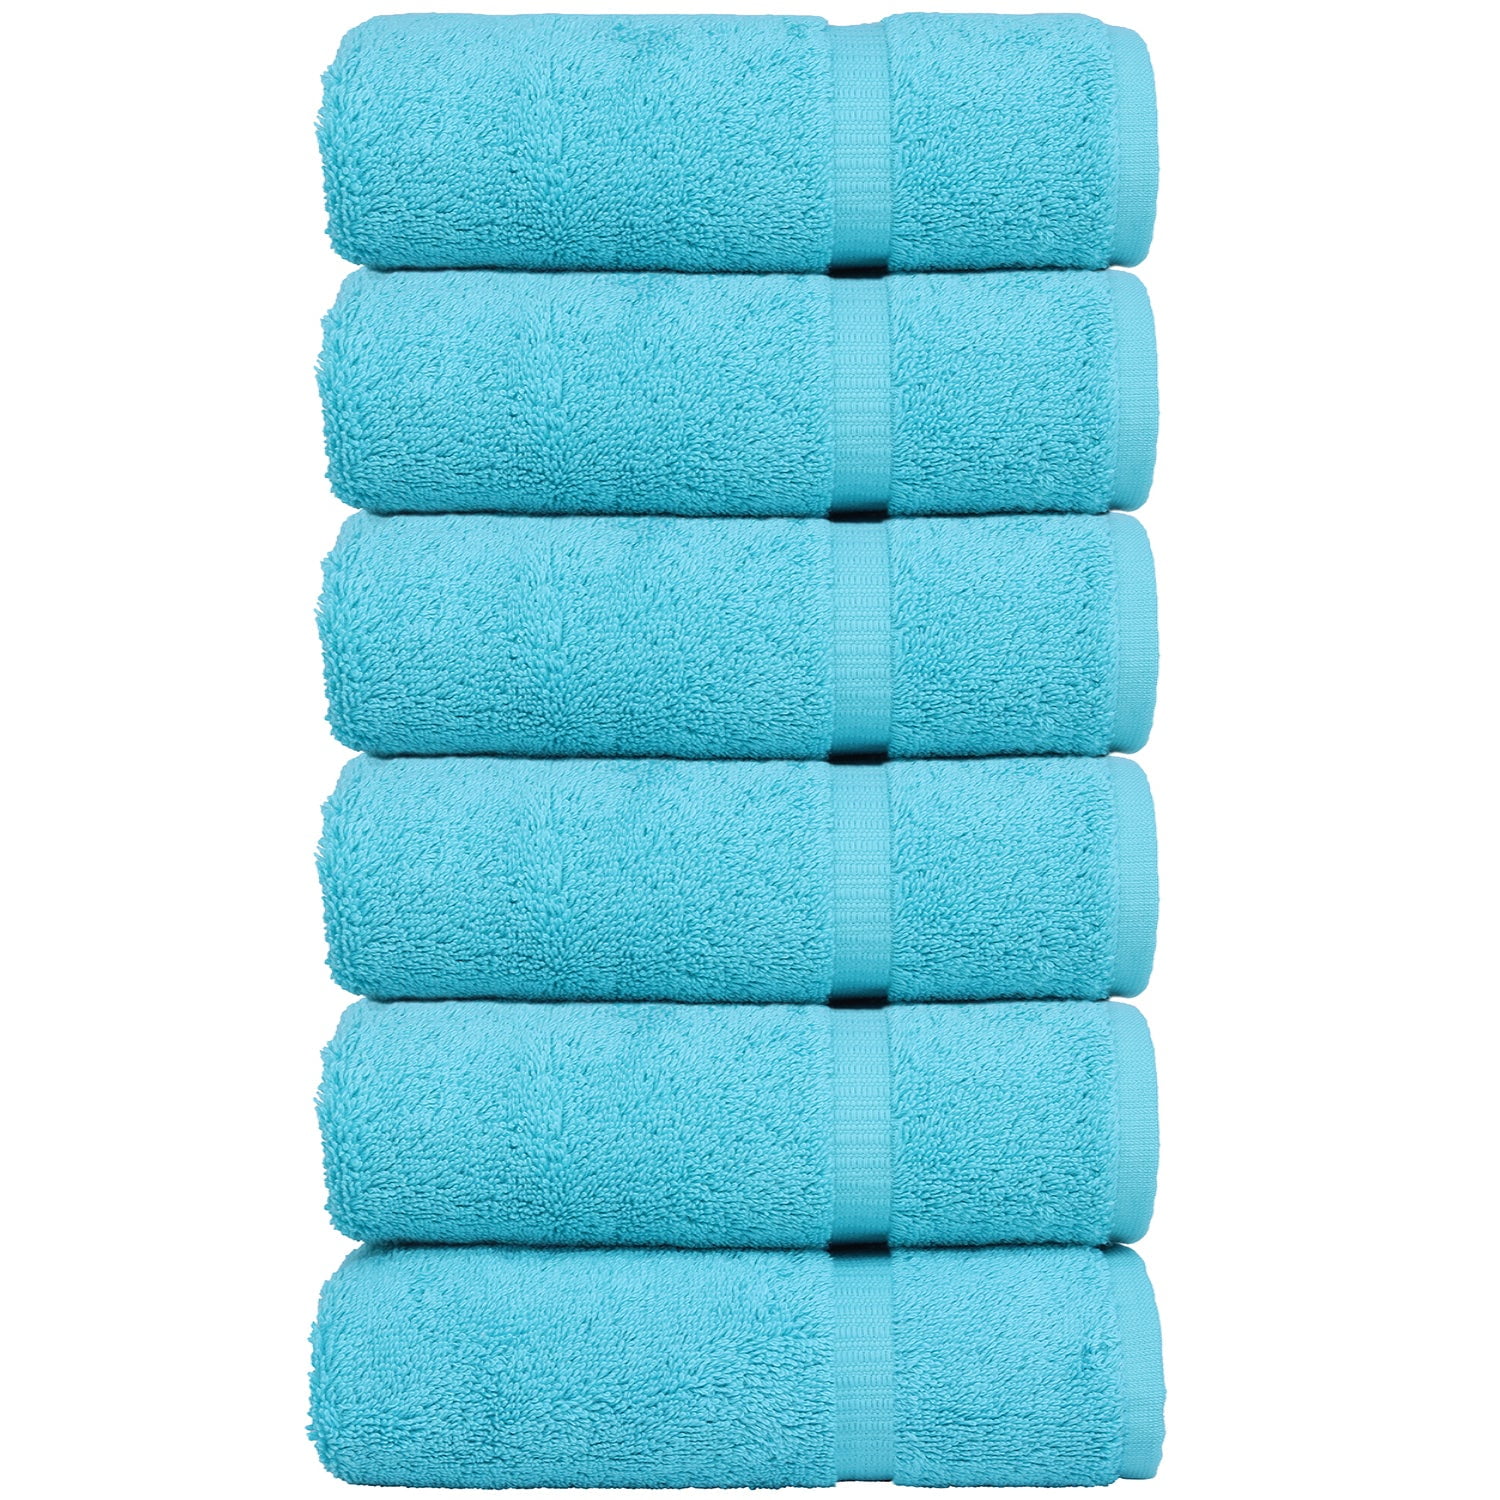 Aston & Arden Luxury Turkish Bath Towels, 2-Pack, 600 gsm, Extra Soft & Plush, 30x60, Solid Color options with Dobby Border - Copen Blue